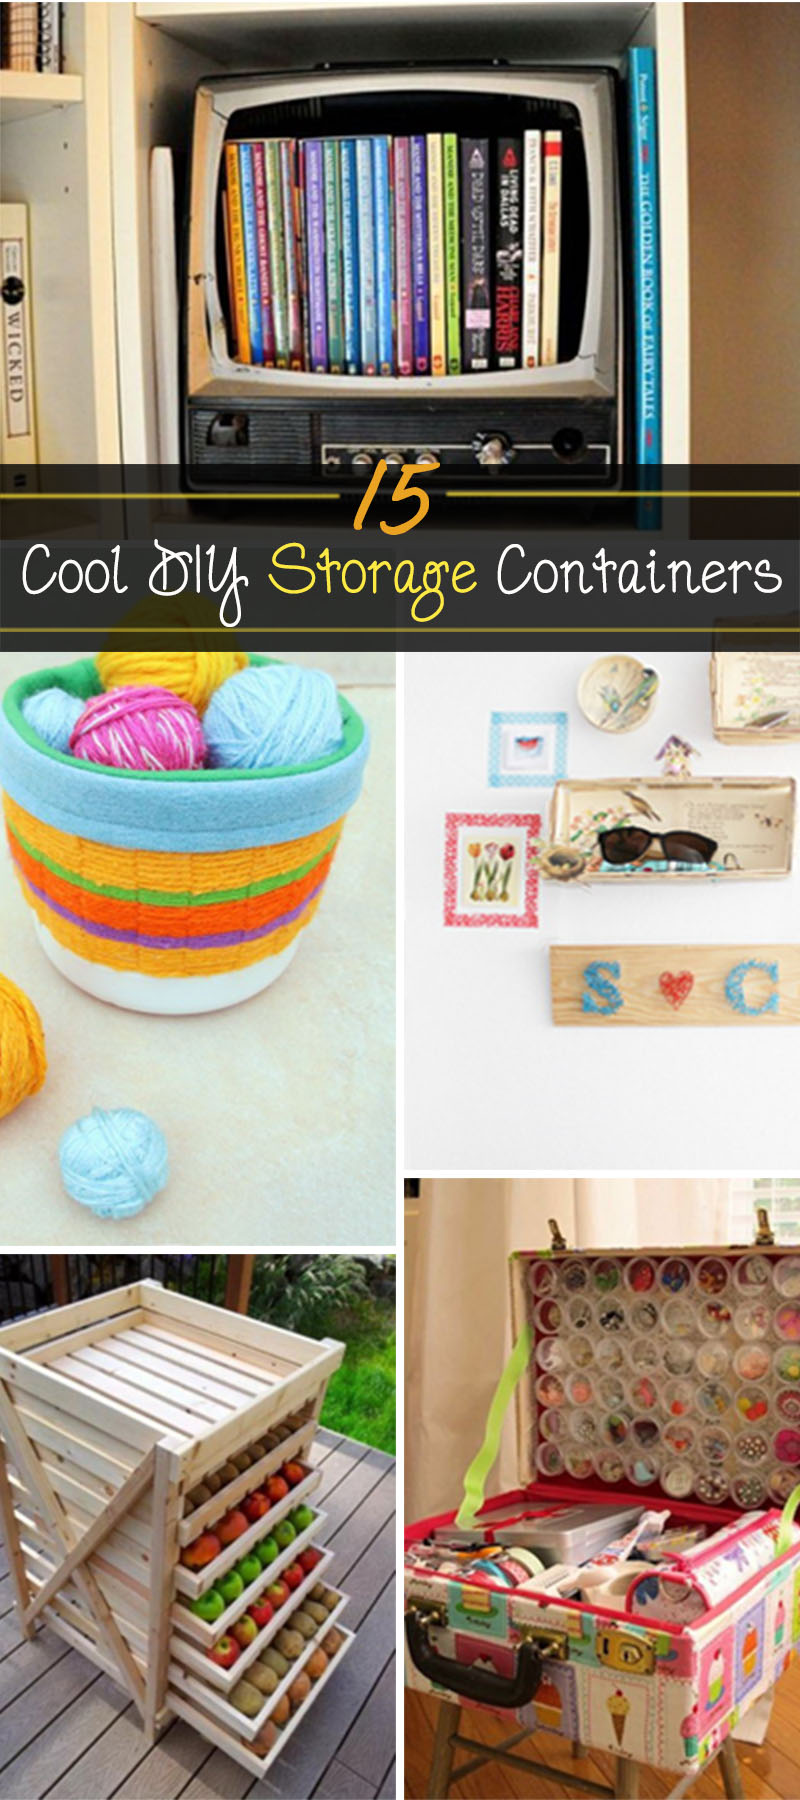 Cool DIY storage containers!